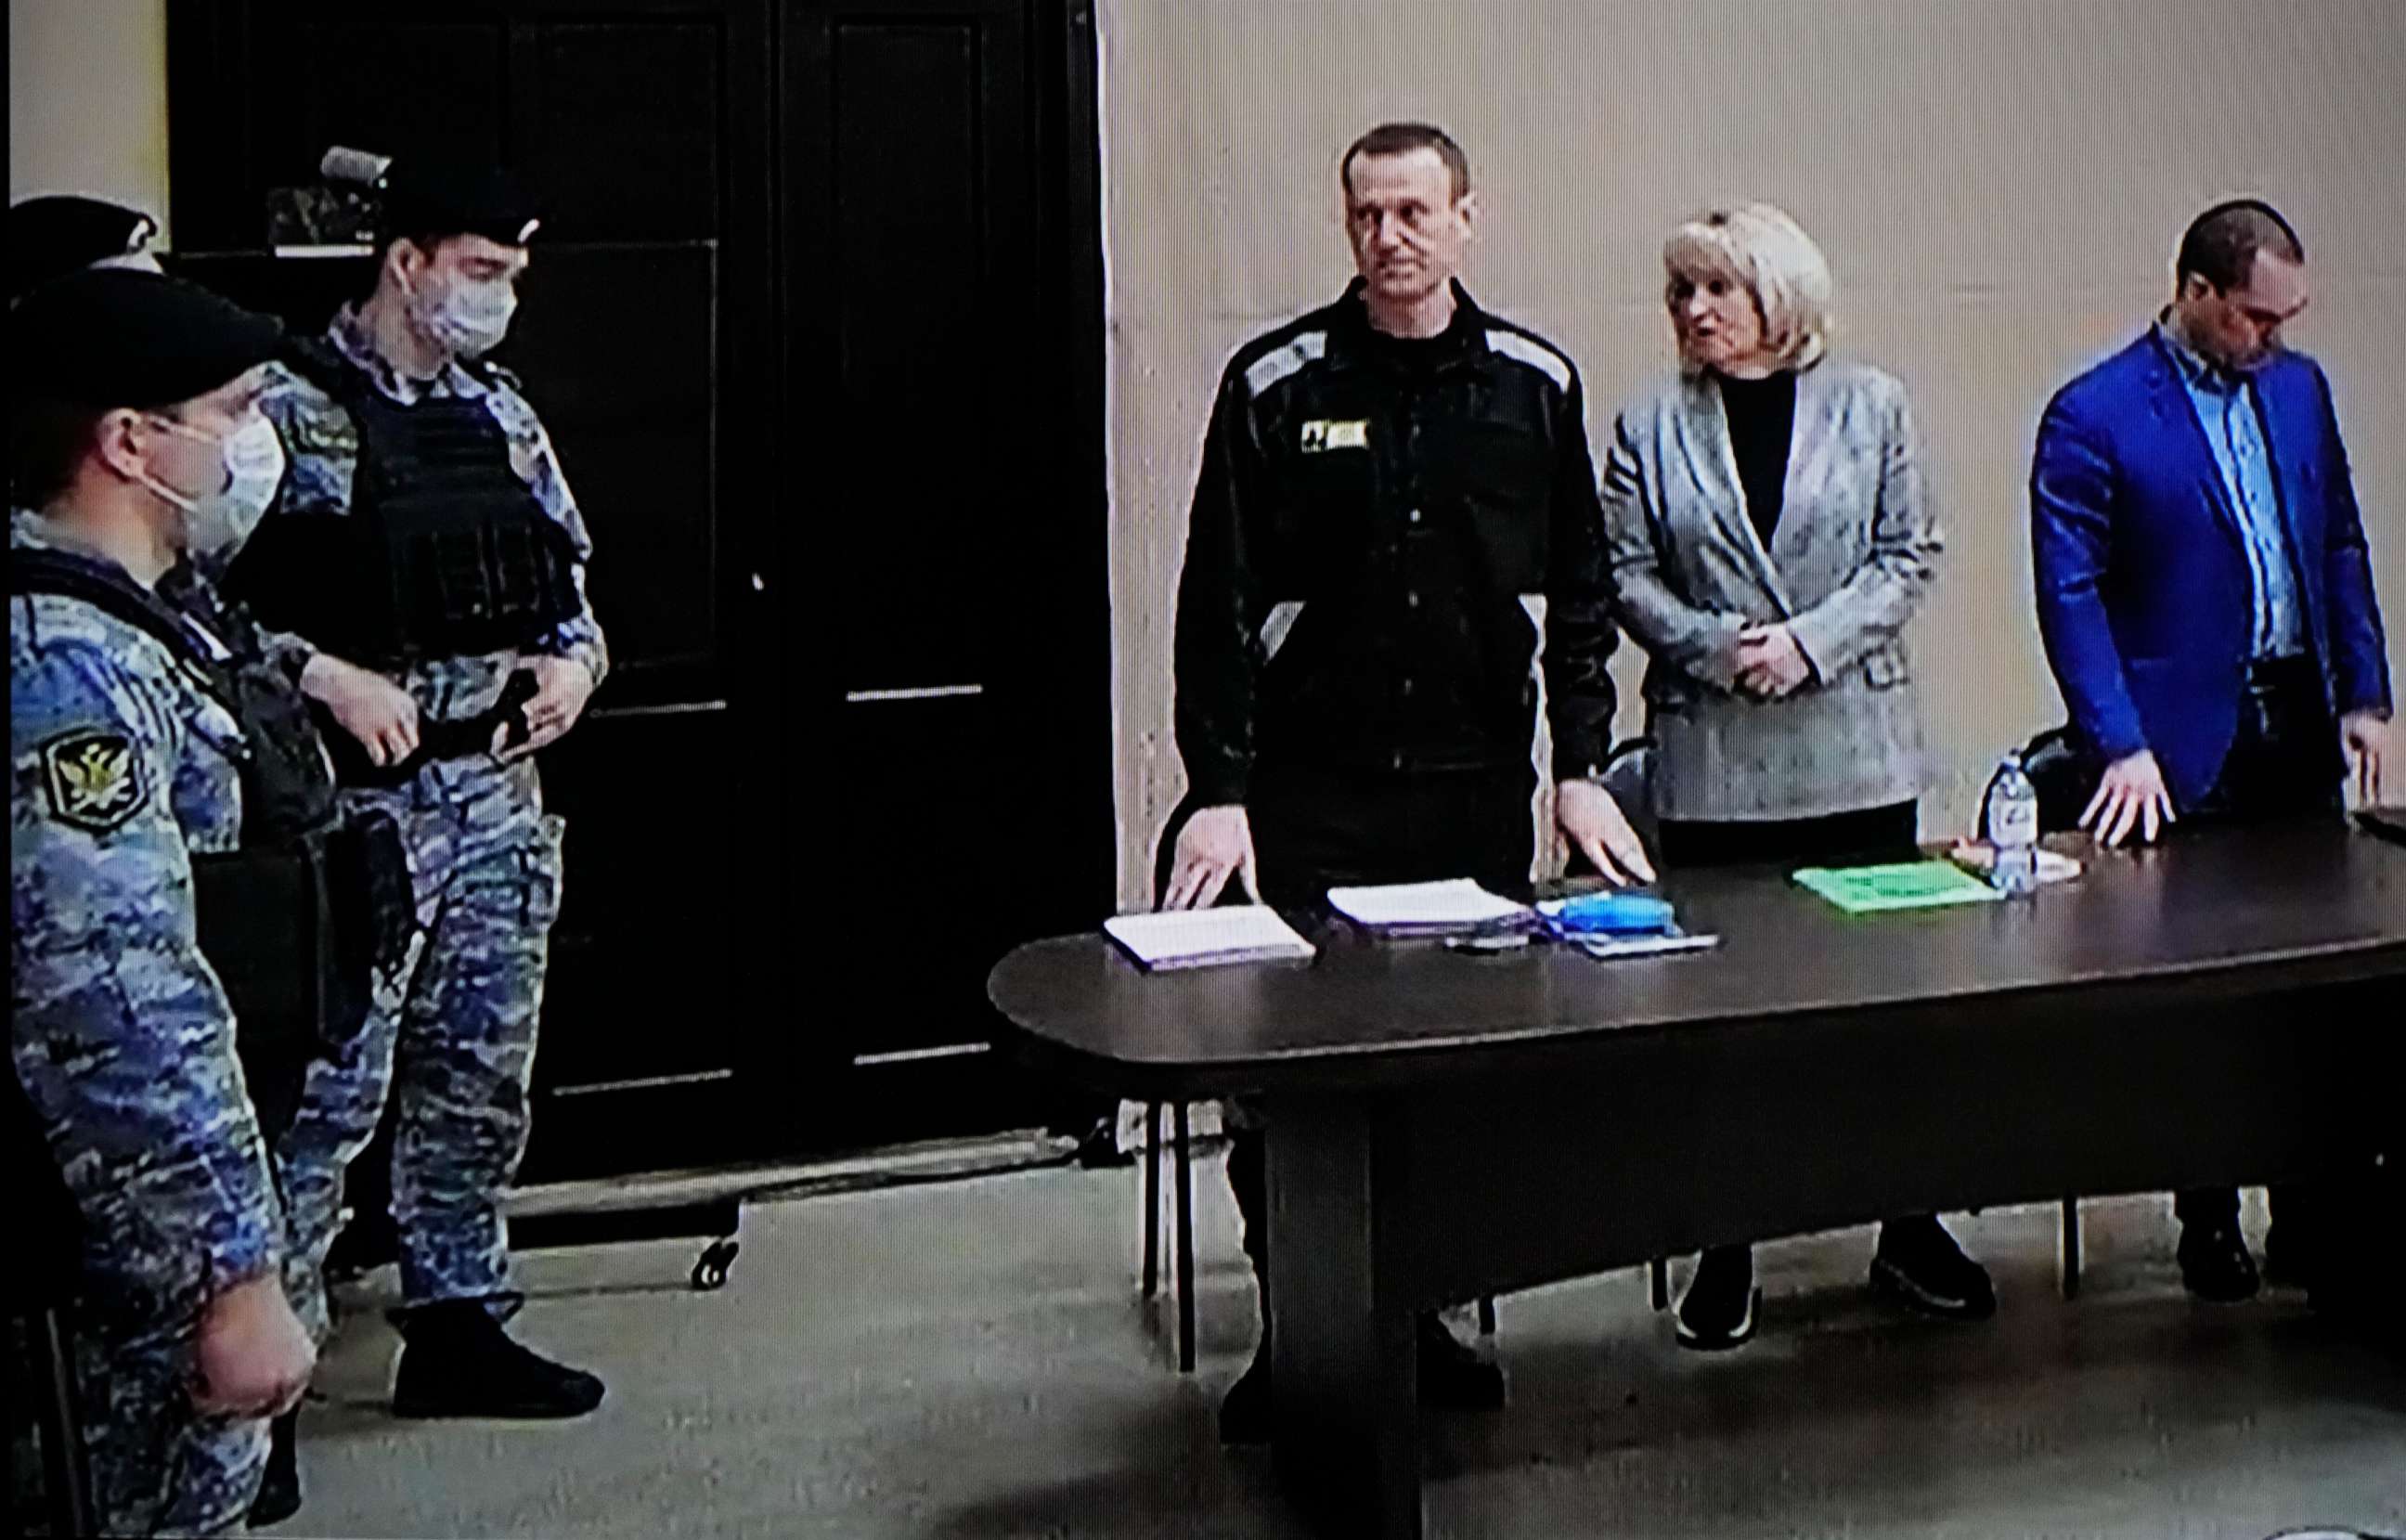 PHOTO: Russian opposition leader Alexei Navalny, center, is seen via a video link provided by the Russian Federal Penitentiary Service, standing next to his layers during a court session in Pokrov, Vladimir region, Russia, on March 22, 2022.